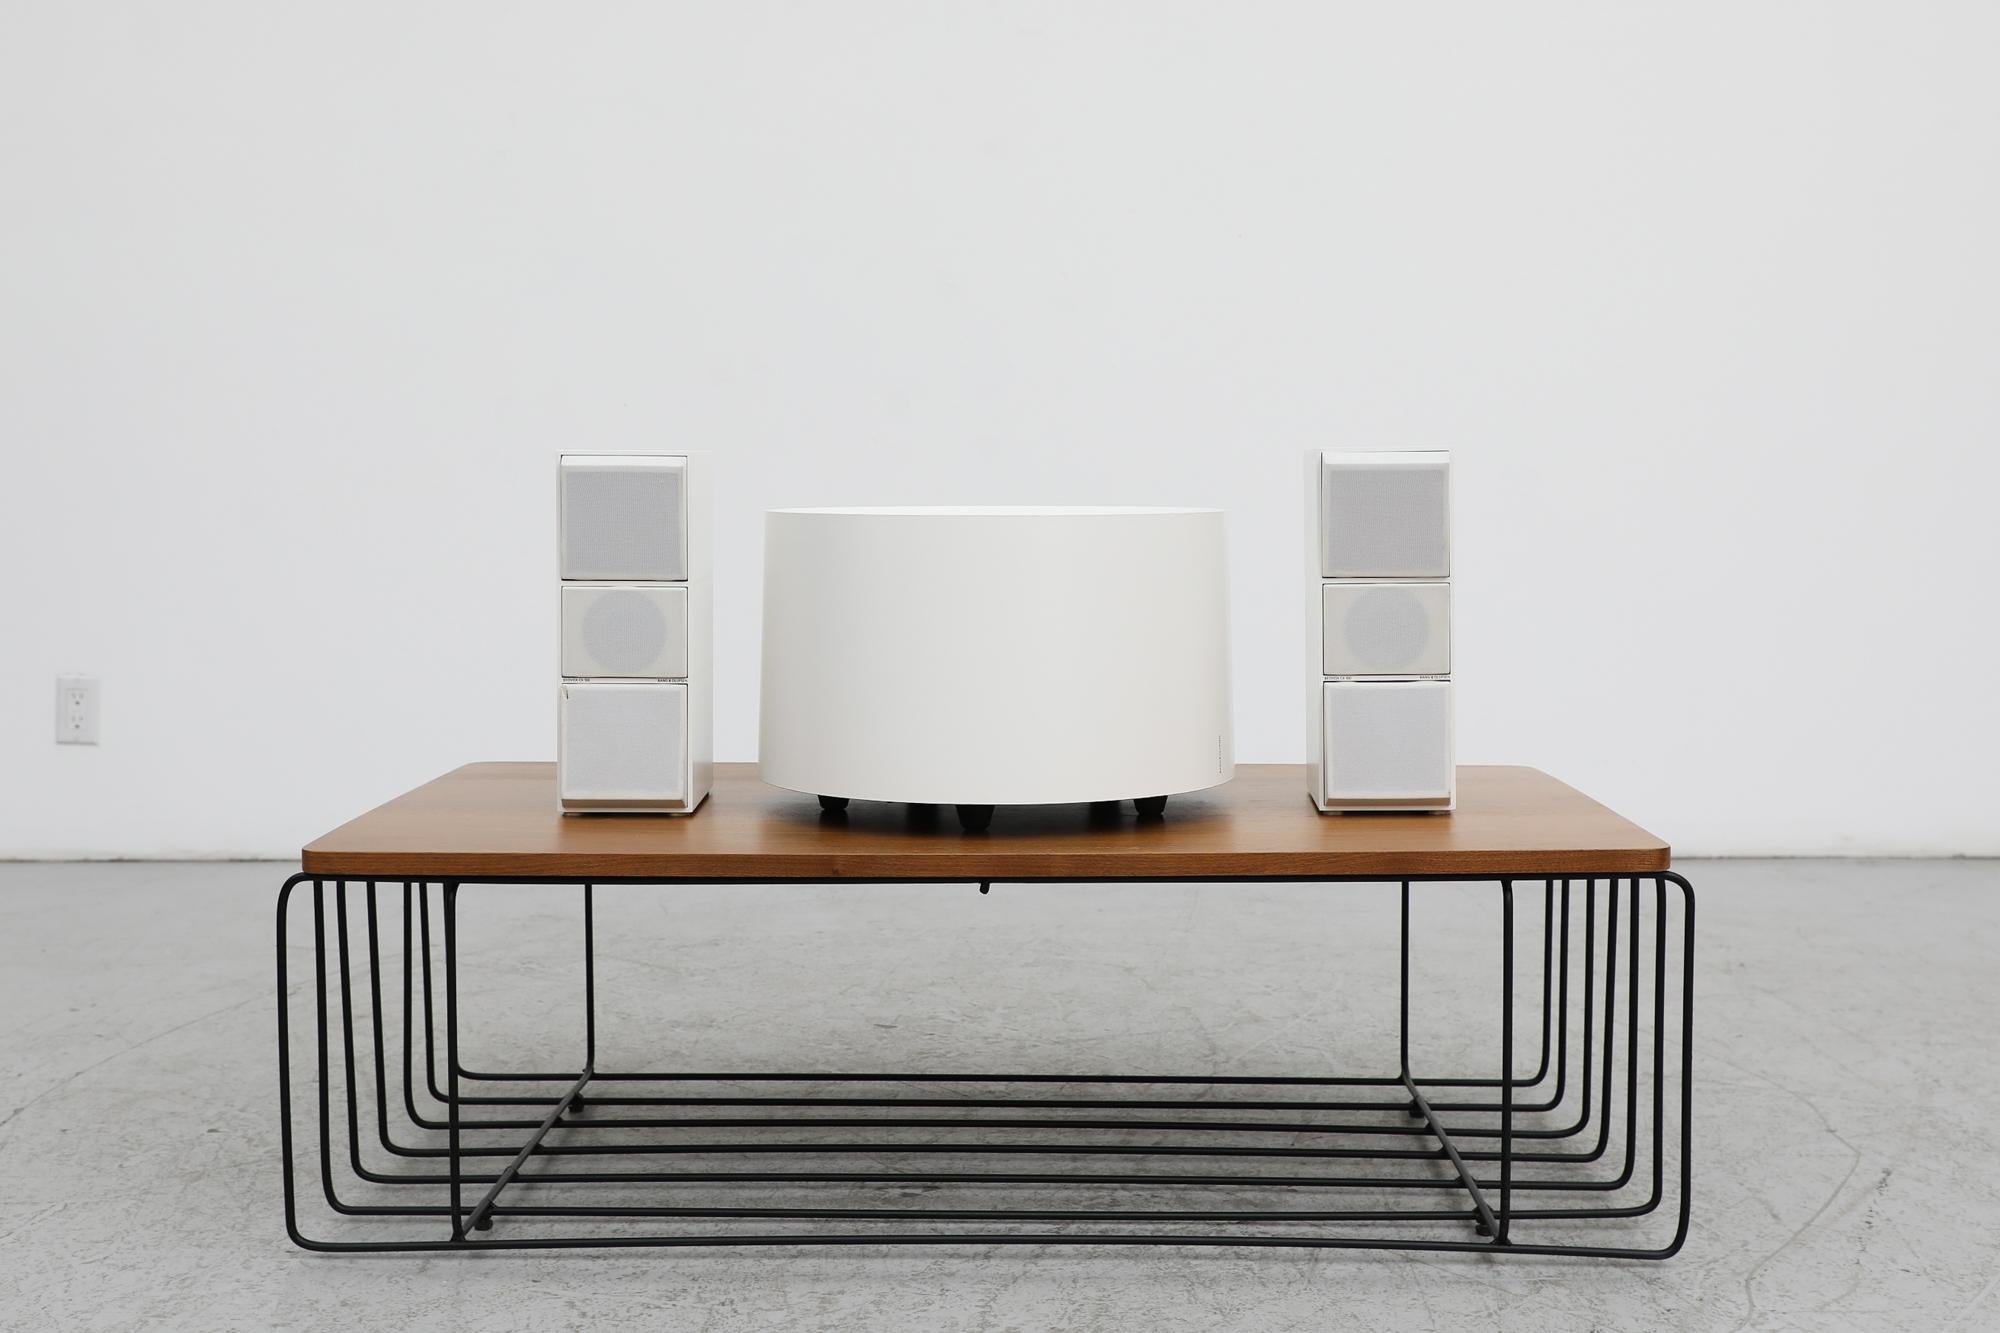 The Beovox Cona, designed in beautifully austere fashion by David Lewis and now permanently in the Moma collection, was the first B&O subwoofer loudspeaker. It was specifically intended for use with the Beovox CX 50 and CX 100 miniature